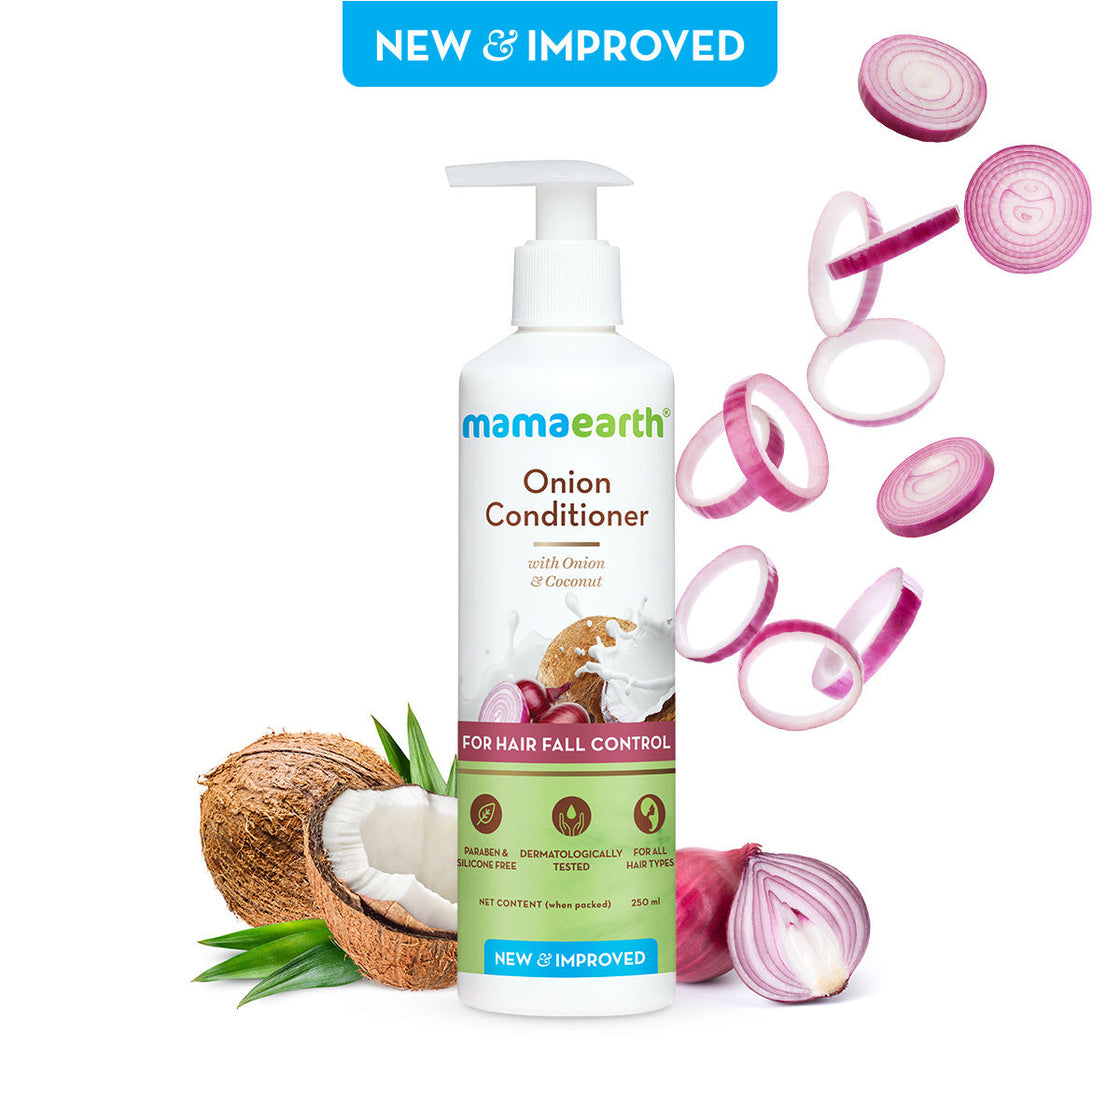 Mamaearth Onion Conditioner With Onion & Coconut For Hair Fall Control